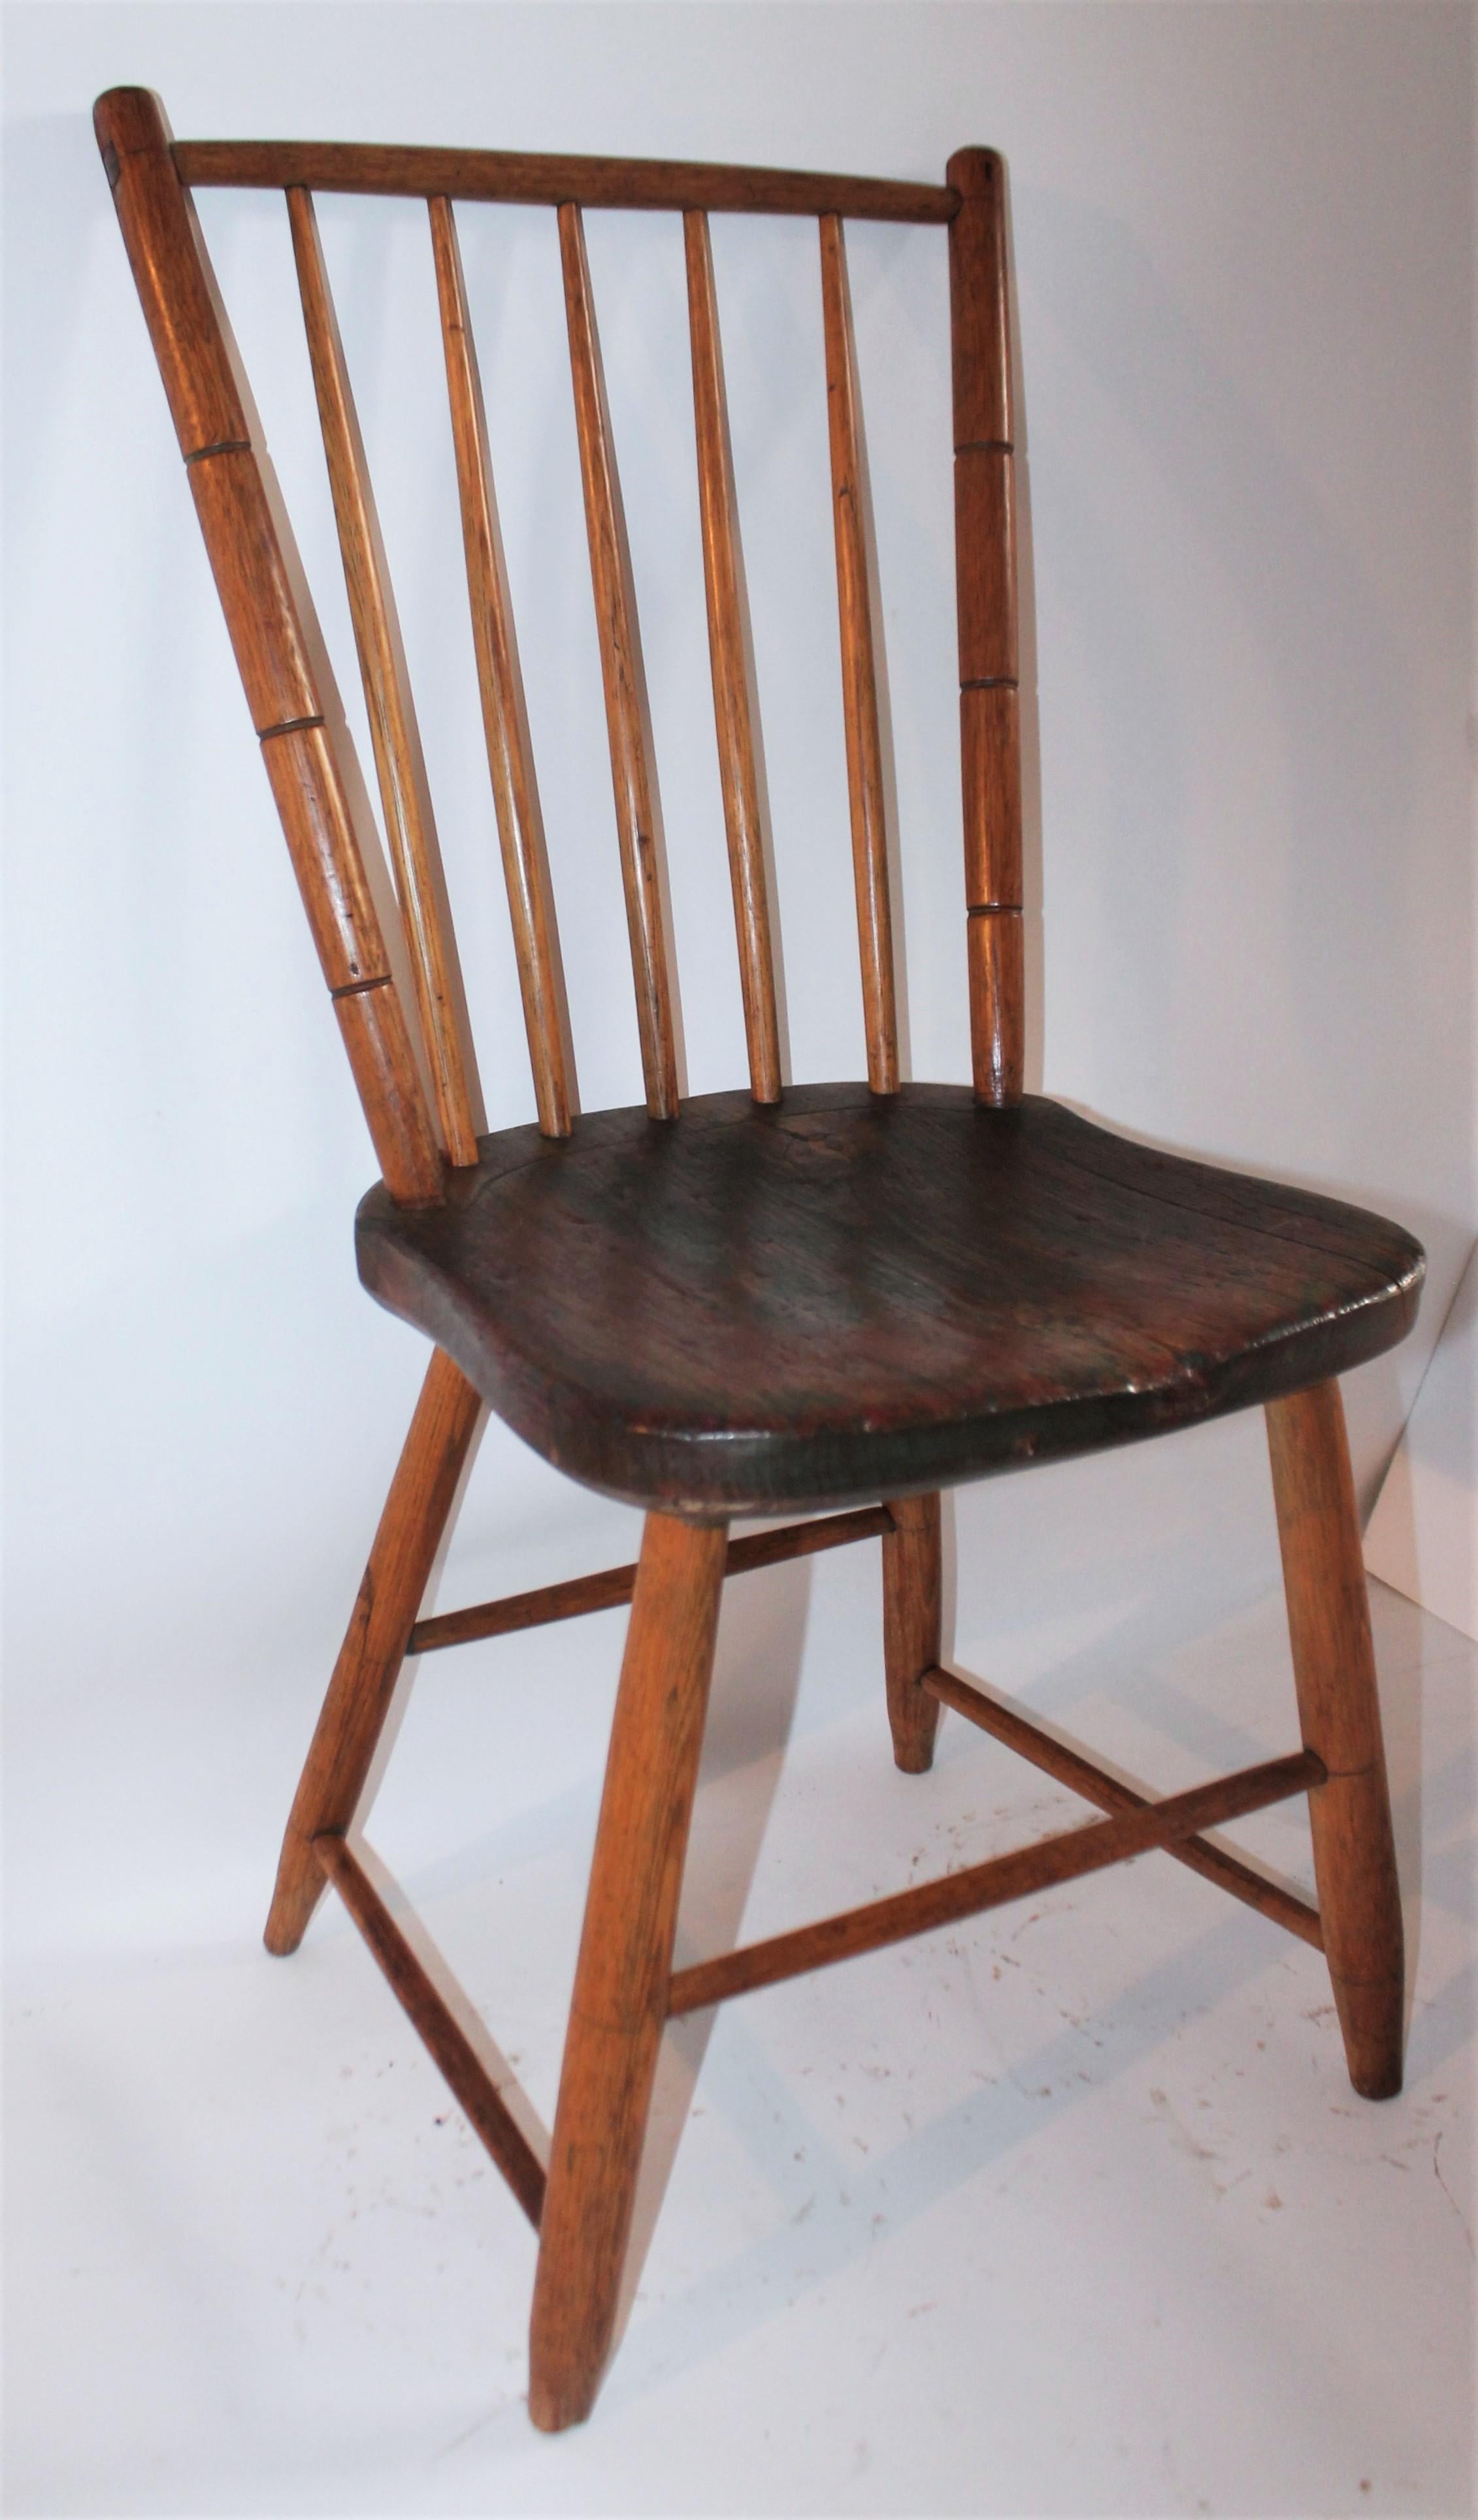 19th century Windsor with original green paint in grain. Great patina and great craftsmanship. Pennsylvania Bird Cage Windsor.